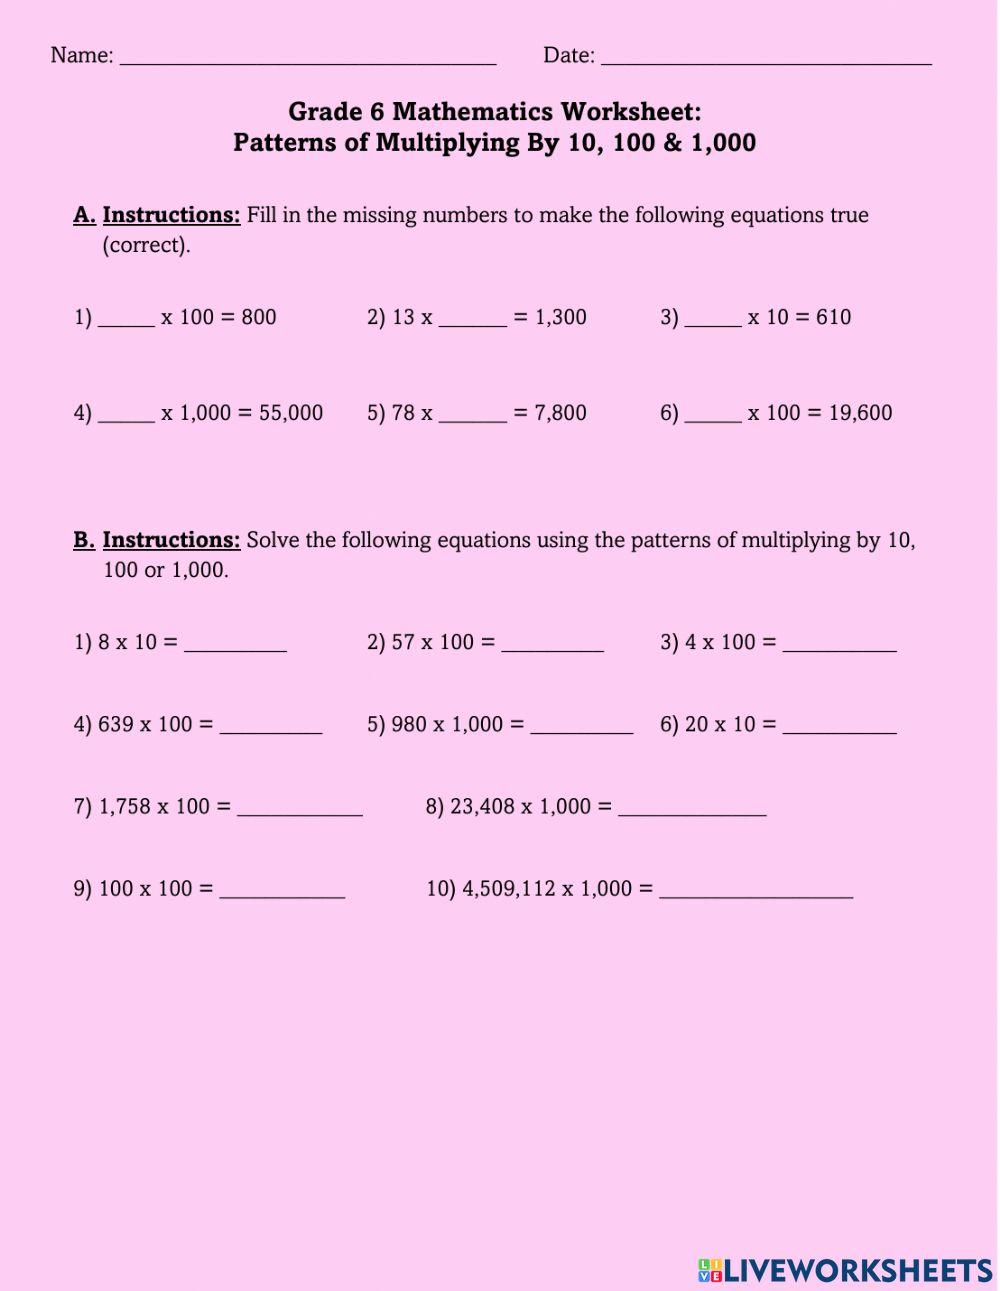 Patterns of Multiplying By Multiples of 10